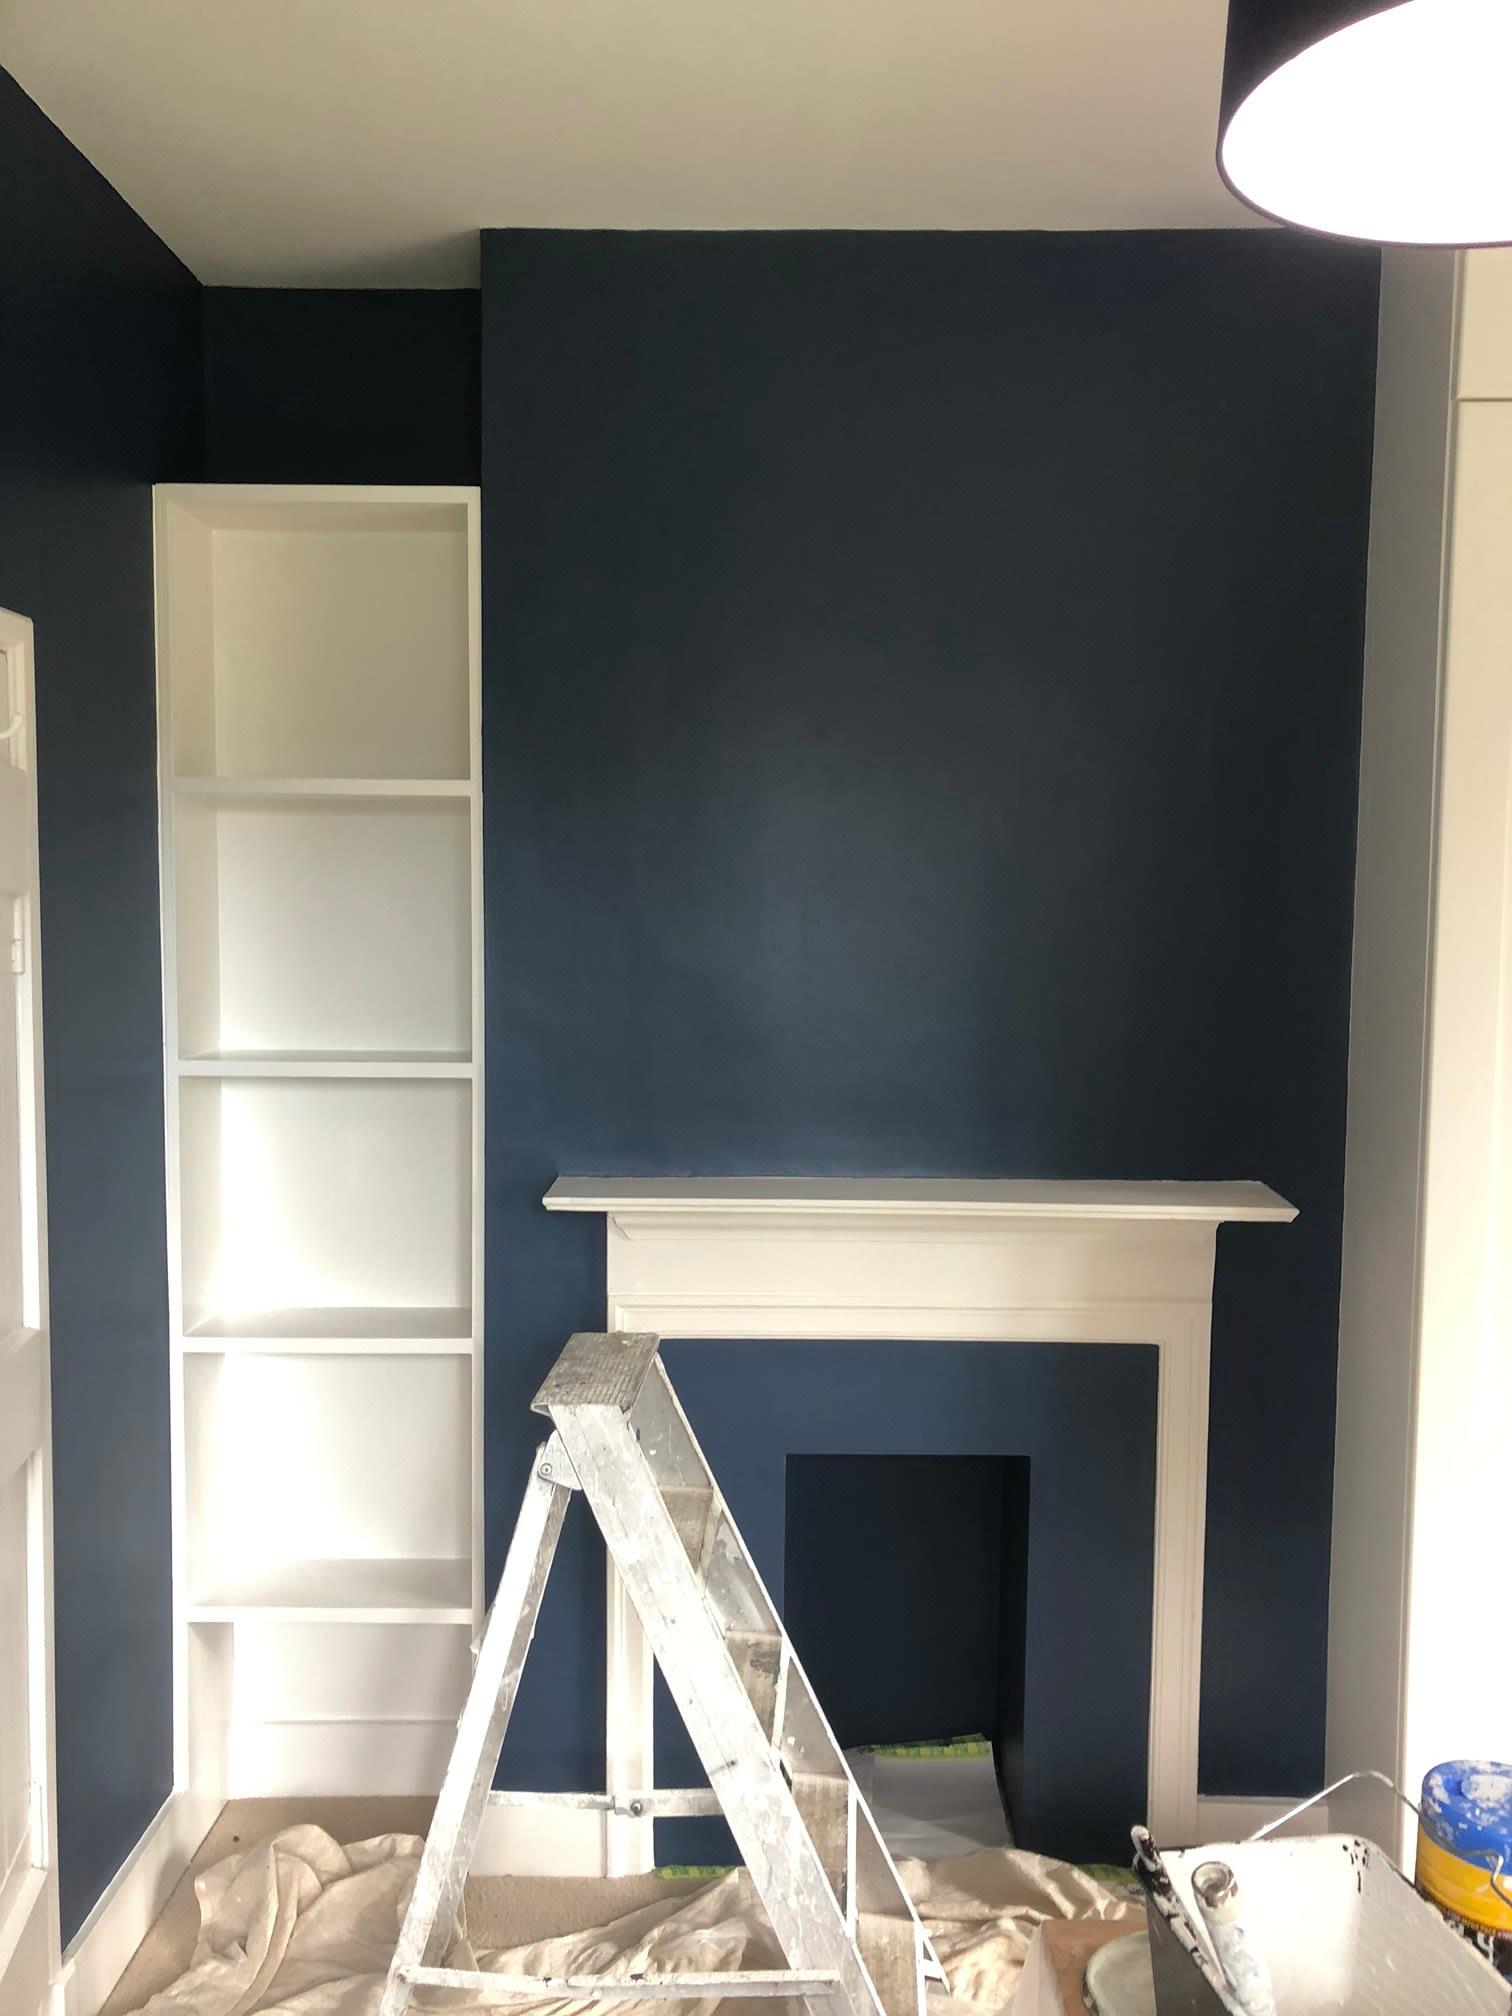 Images Jonathan Rees Painter & Decorator